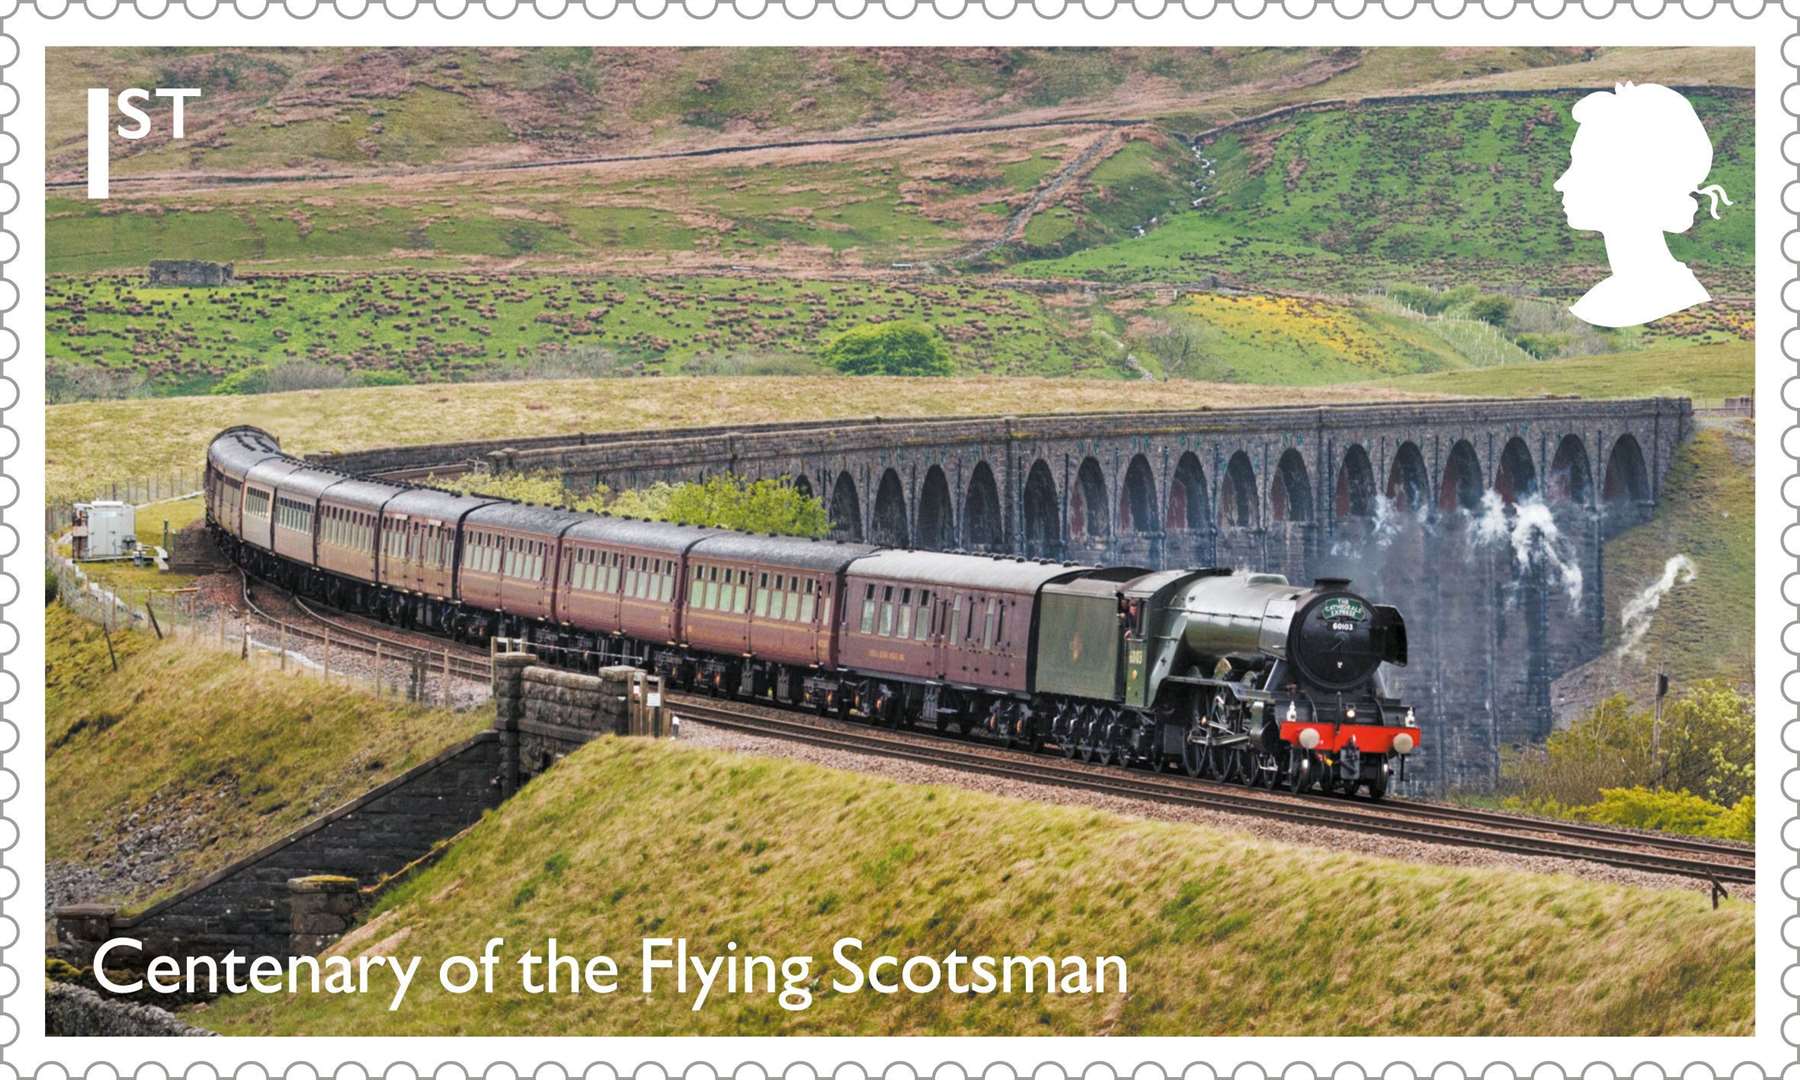 One of 12 new stamps to mark the 100th anniversary of the Flying Scotsman – the final set of stamps to feature late Queen Elizabeth II’s silhouette (Royal Mail/PA)